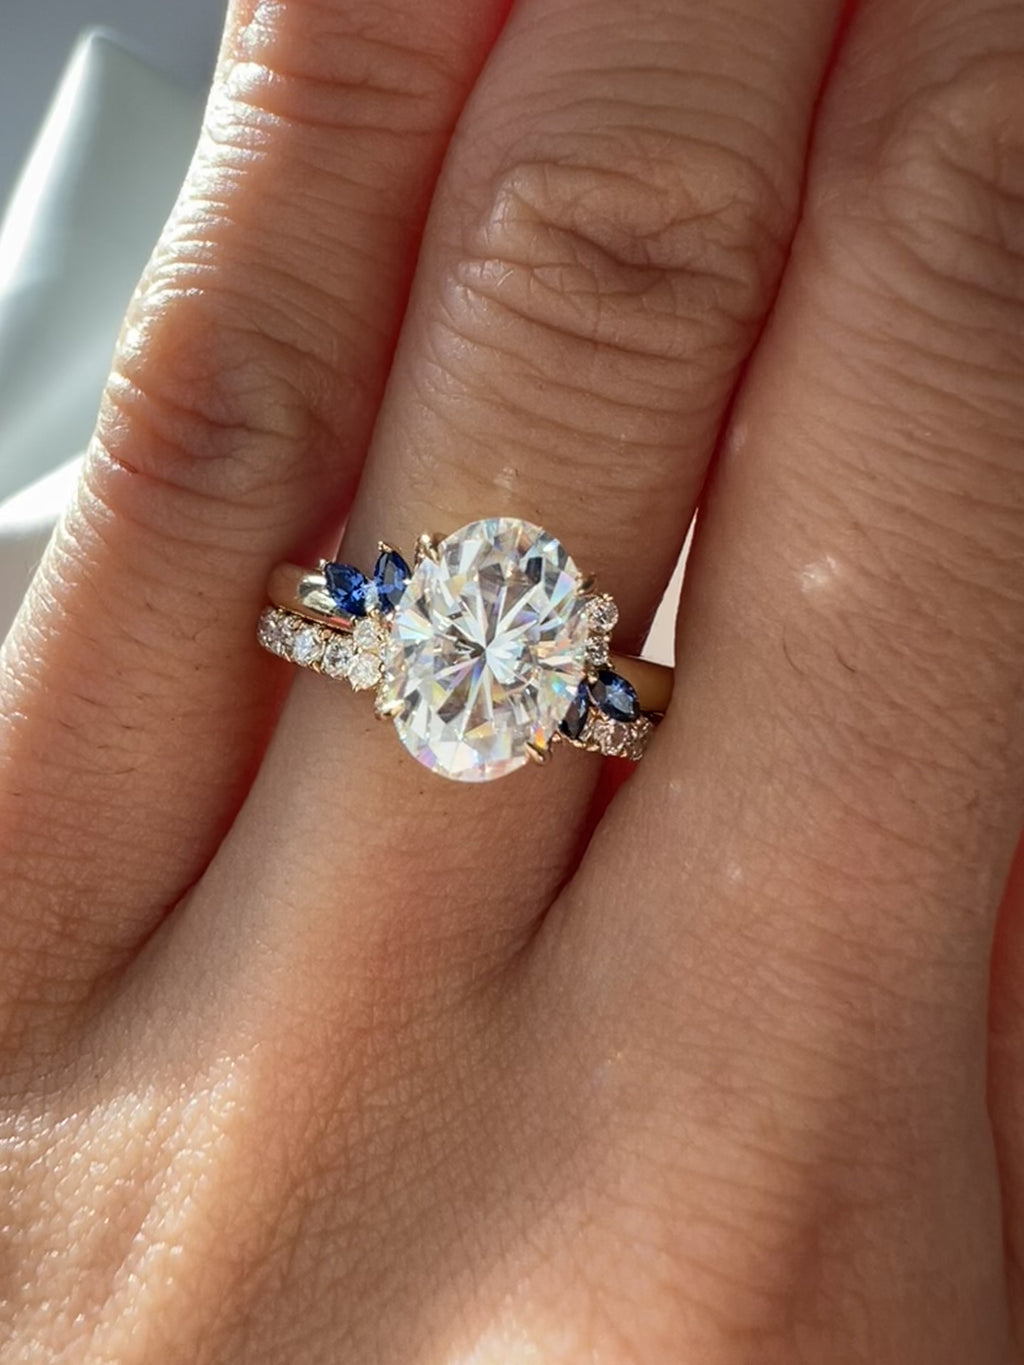 Paired with our classic moissanite pave eternity band